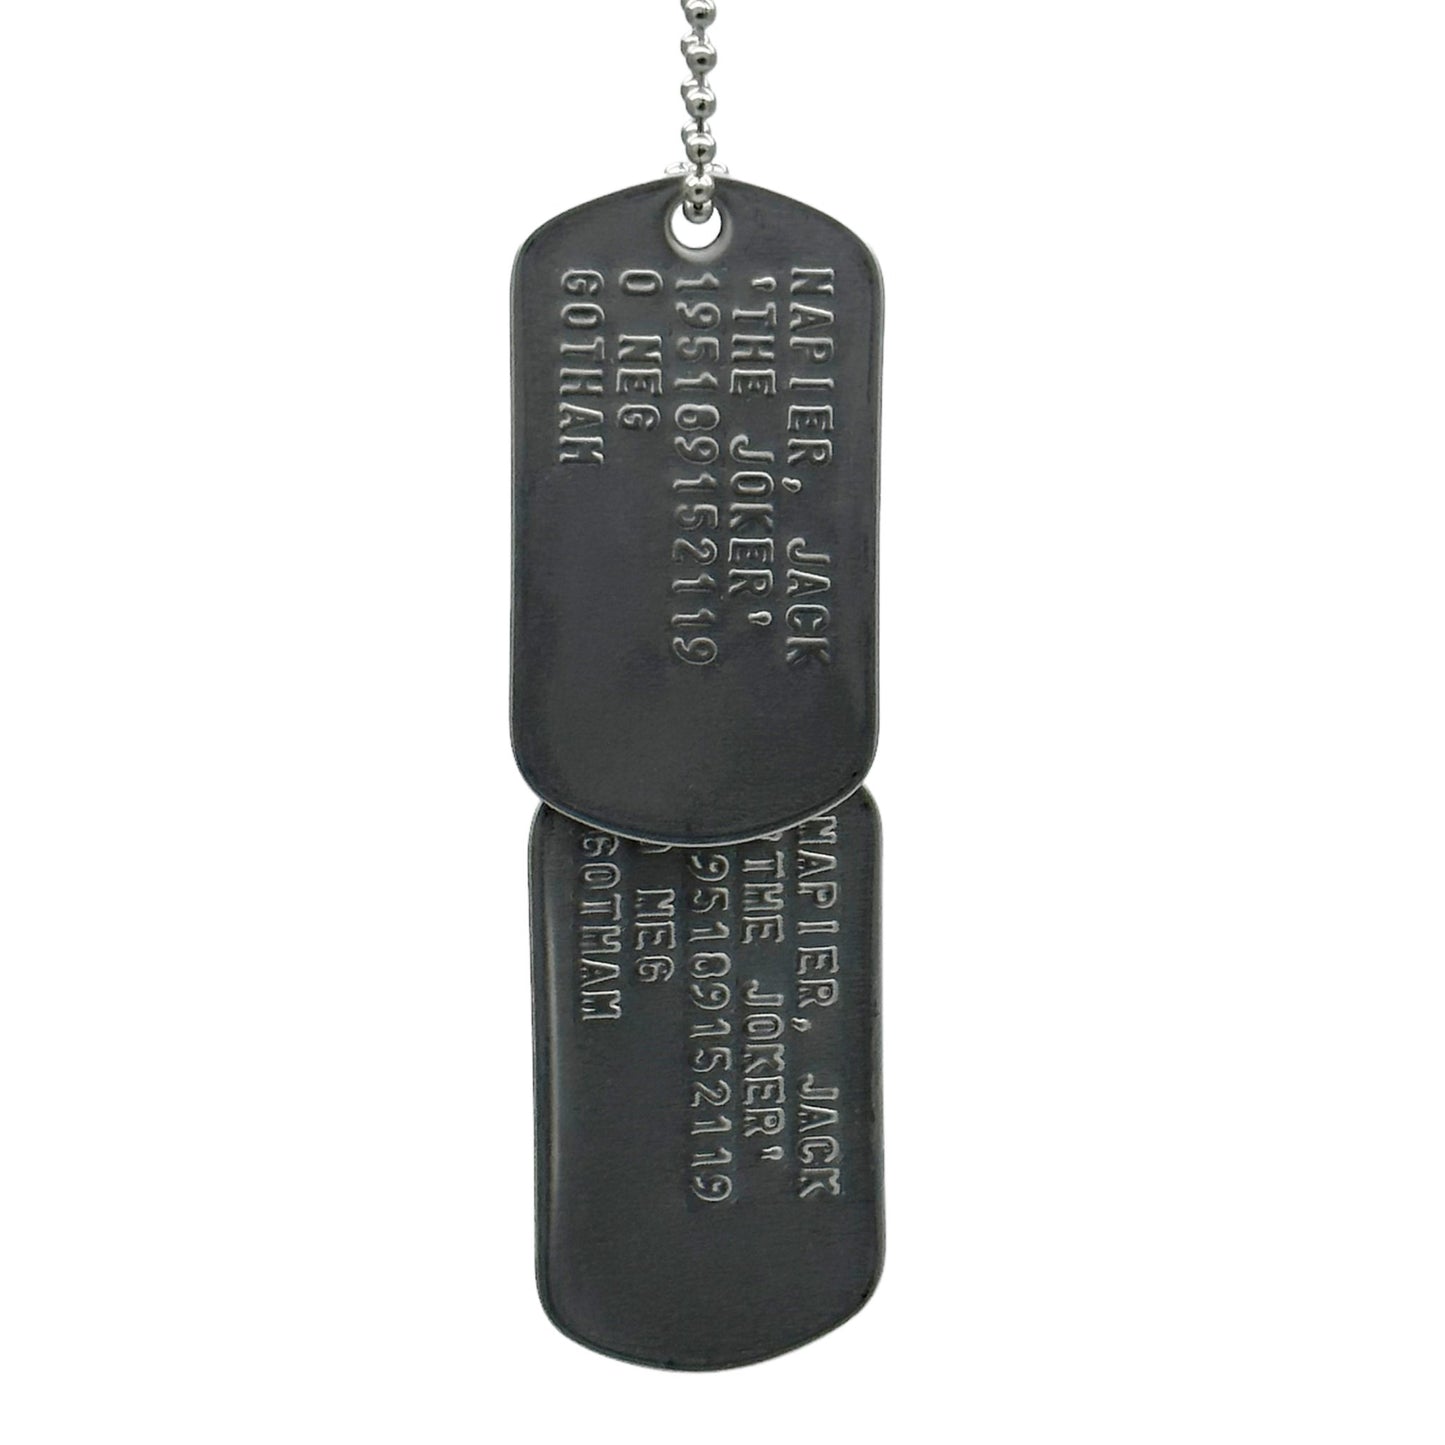 Jack Napier 'JOKER' Dog Tags - Costume Cosplay Prop Replica Military - Stainless Steel Chains Included - TheDogTagCo